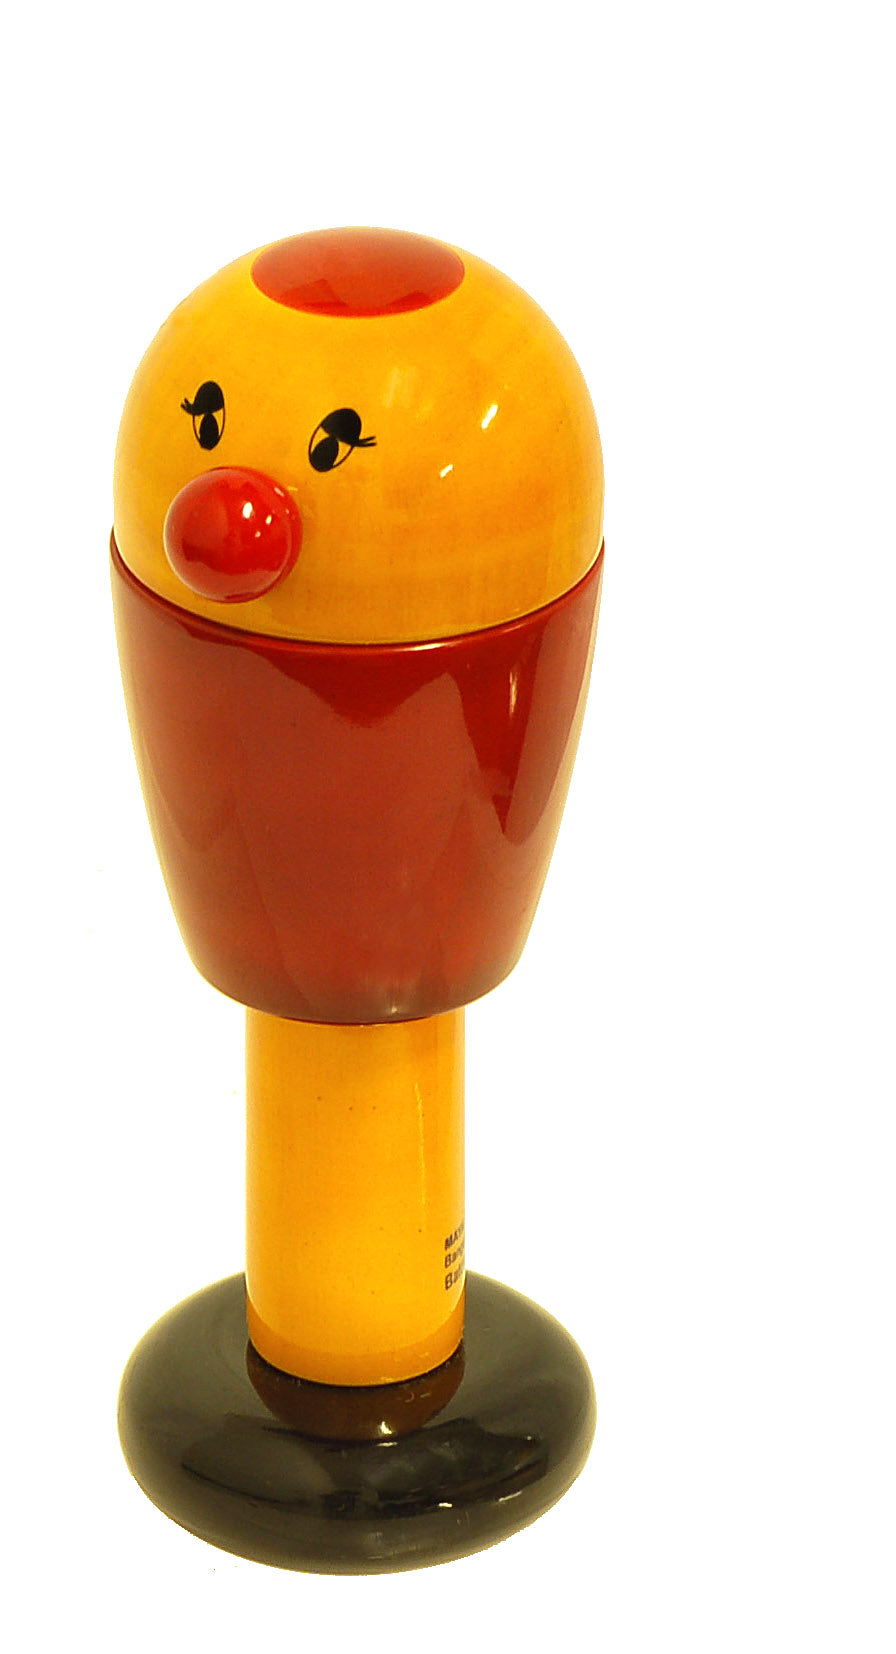 Buy Ratna's Musical Sweet Sound Little Chime Junior Rattle for Kids Online  at Low Prices in India 